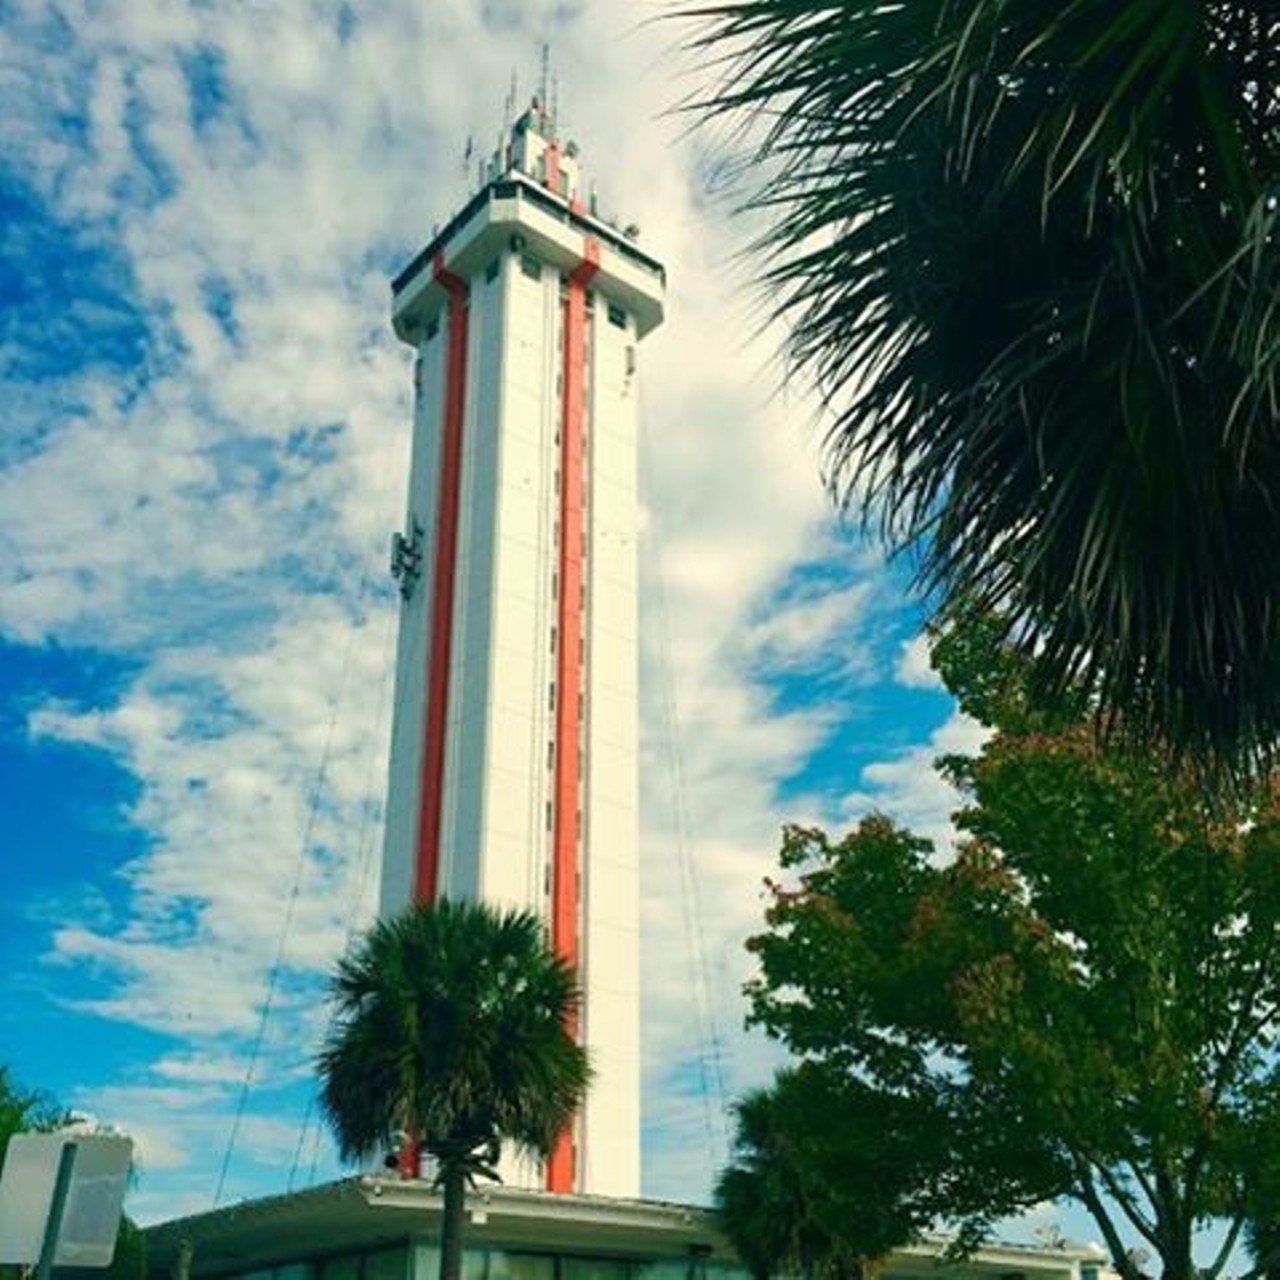 Citrus Tower, Clermont
141 North Hwy 27, Clermont
Offering a 360 degree view of eight counties, The Citrus Tower in Clermont is a world famous observation tower complete with a charming gift shop and light show.
Photo via merelymer on Instagram